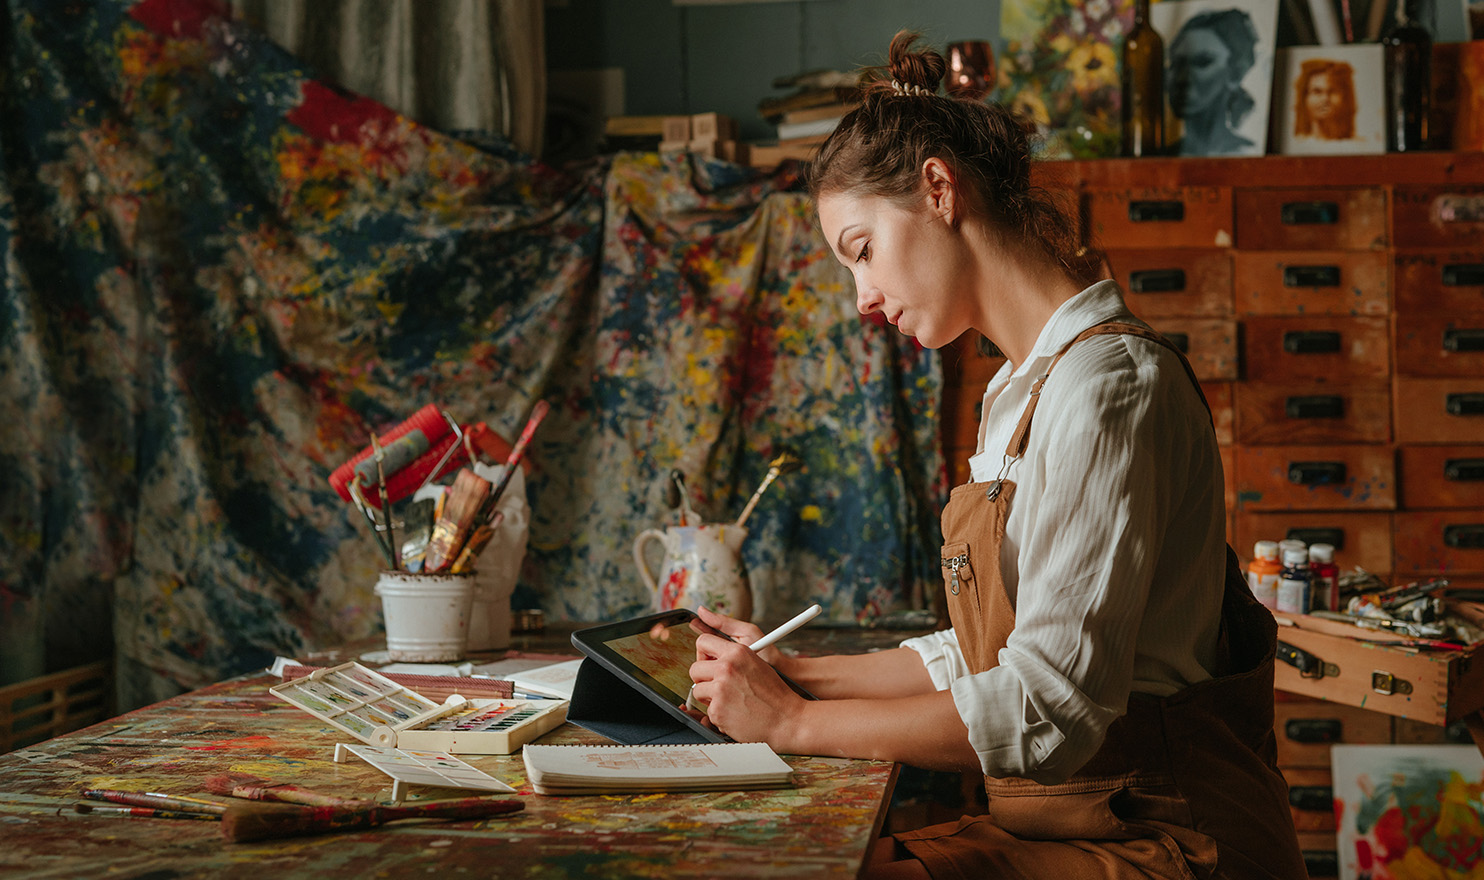 An artist is sitting at a table in her workshop as she completes business tasks on her tablet with a stylus pen. She is wearing her apron and is next to drop cloths she uses while painting.